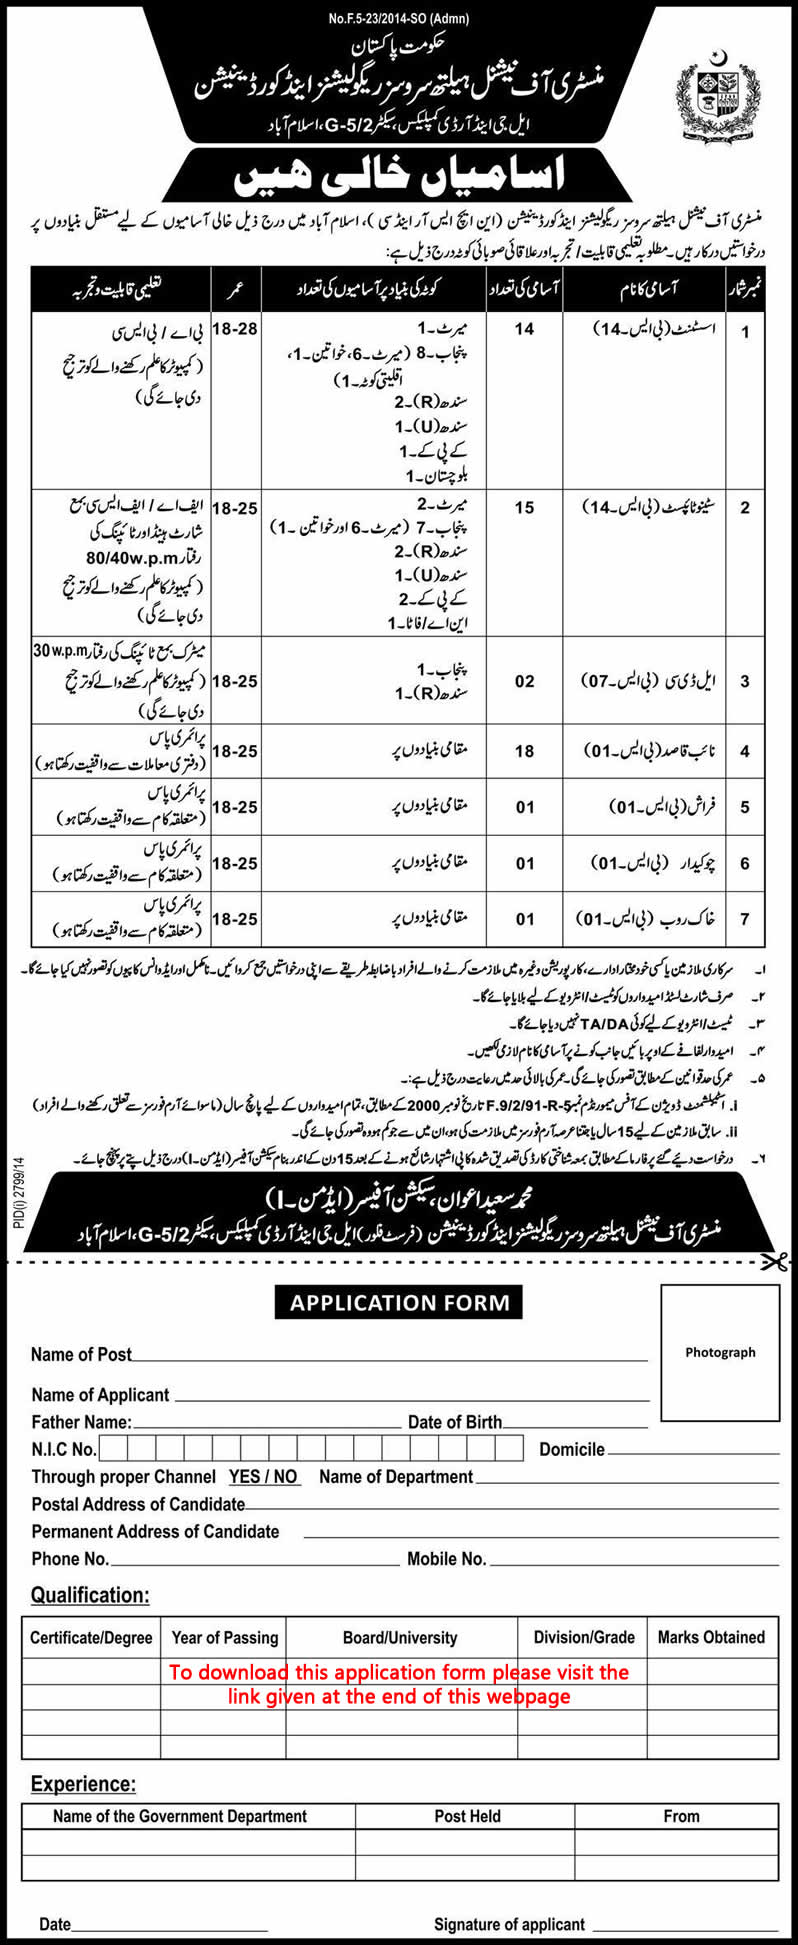 Ministry of National Health Services Regulations & Coordination Jobs 2014 December Application Form MoNHSRC / NHSRC Pakistan